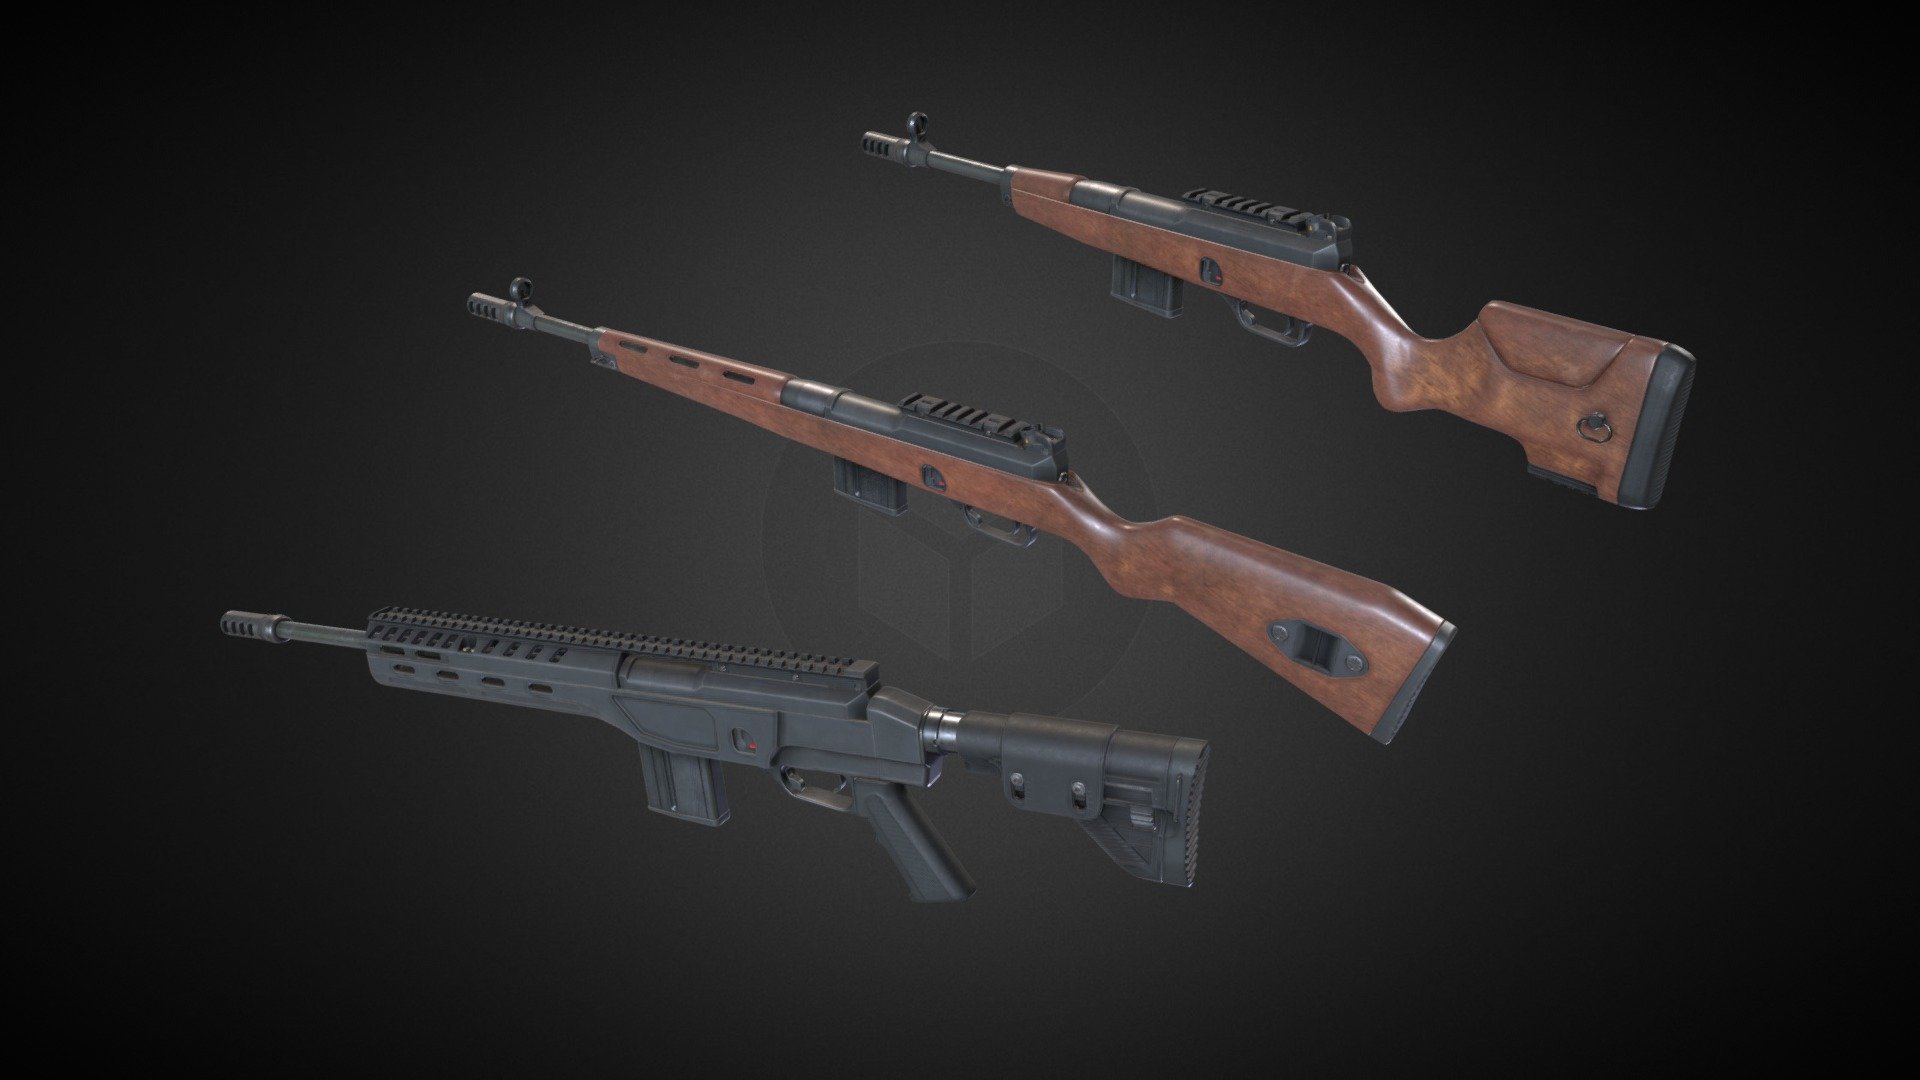 Classic looking hunting rifle from 80' chambered in 7.62×51mm with two additional body models, fancy short and tacti-cool aluminium.  

All three versions are rigged, but there are also files with all parts separated.

Rifle have 3 Main PBR Materials in 4K, plus separate 4K for aluminum and short variants, plus separate for stock/muzzle. Default Wood/black and FDE/carbon-fiber colors are included.

Verts: 14.6K (standard model)

Tris: 28.8K (standard model)  

Made in Blender.  

NOTE! In preview model I used jpg textures as original uncompressed ones for all three variants are a bit heavy 3d model